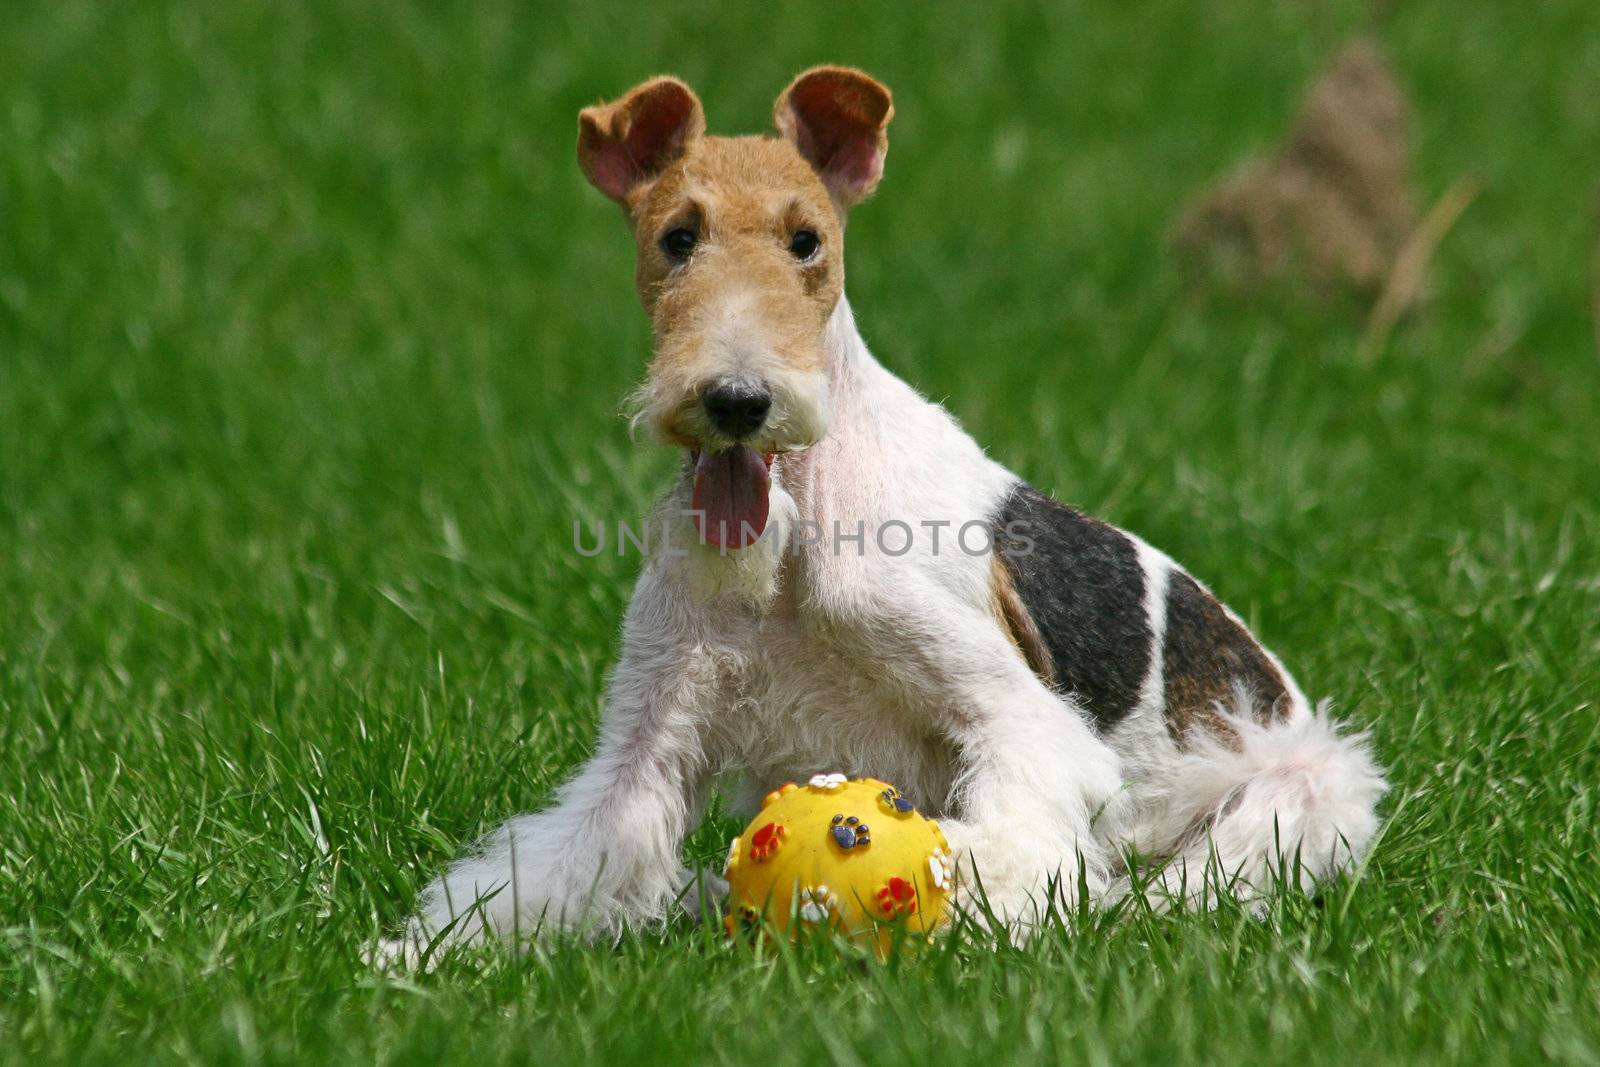 Wired Fox Terrier and a ball by gsdonlin